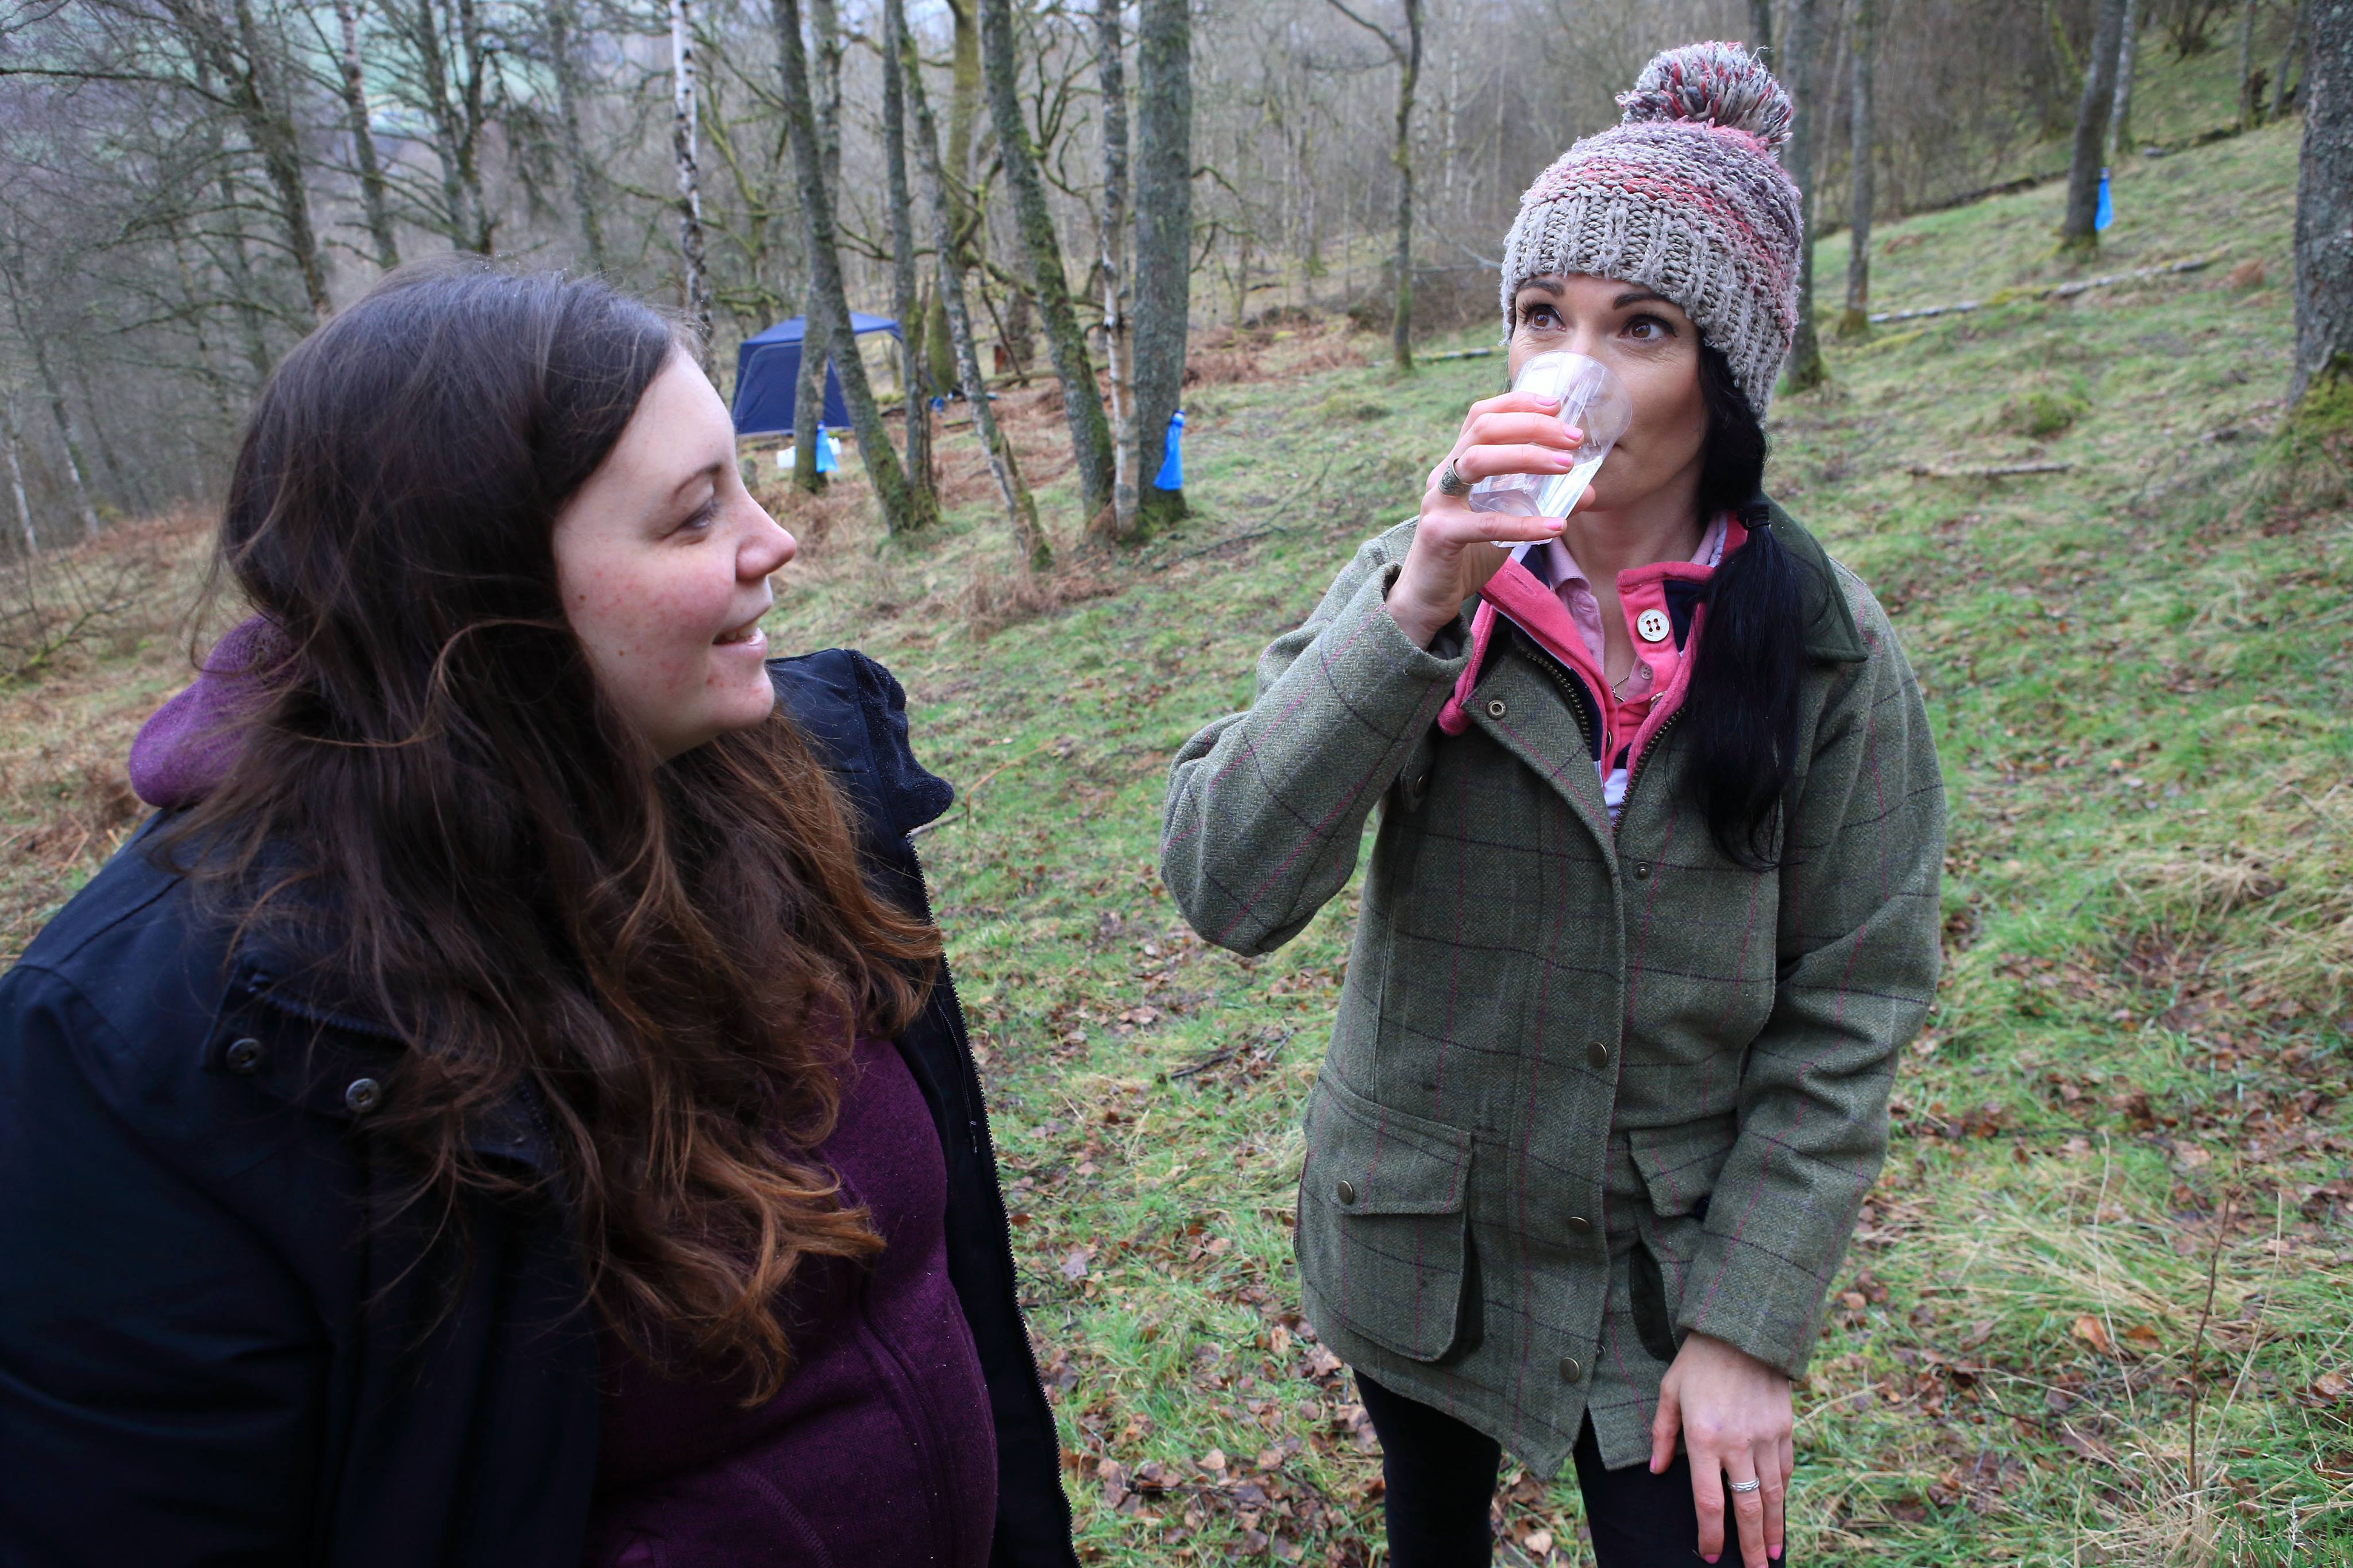 Gayle Ritchie enjoys birch water fresh from the tree while Gabrielle Clamp of Birken Tree looks on.